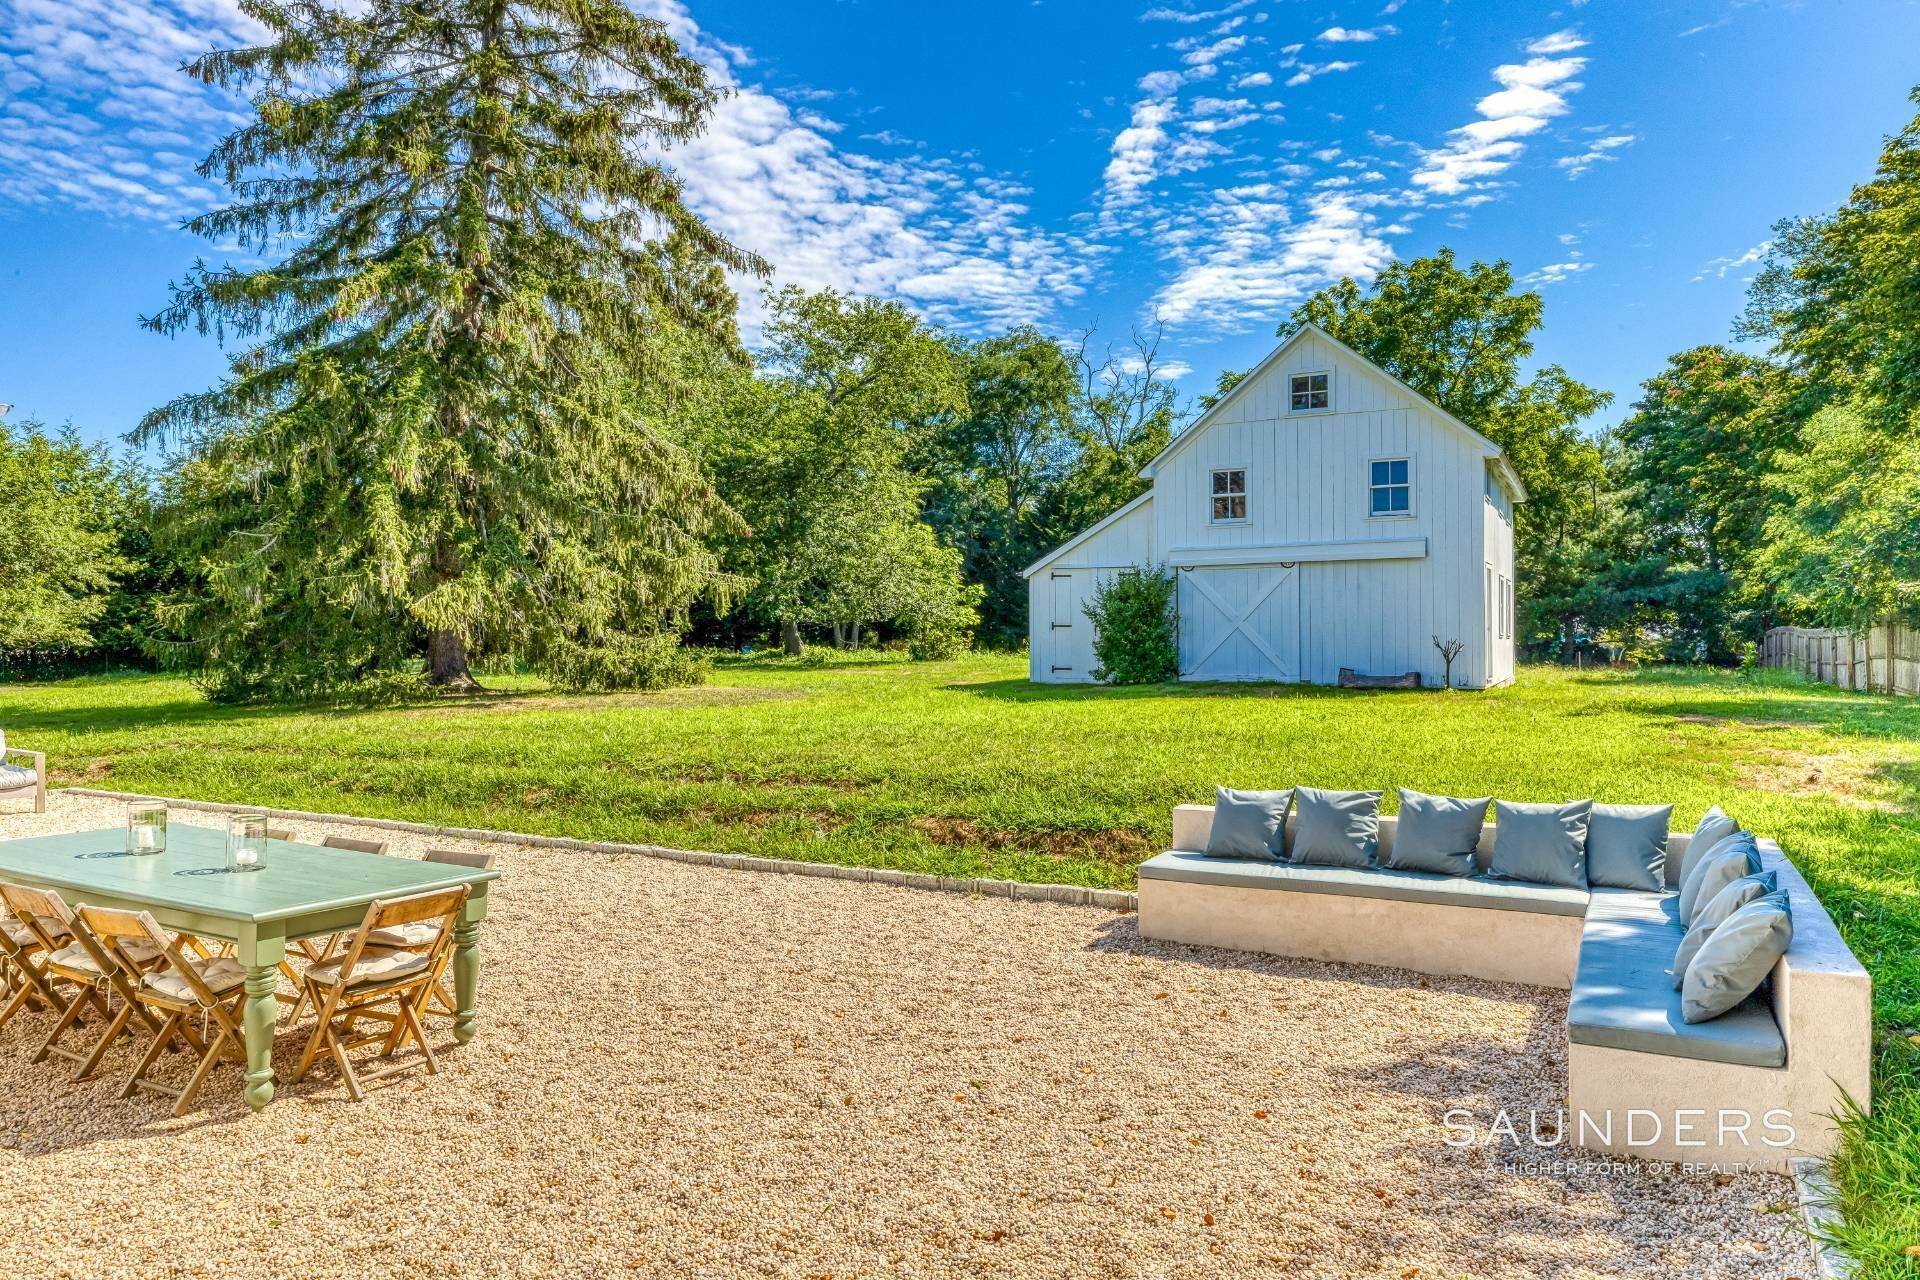 9. Single Family Homes for Sale at Shelter Island Restored 1900 Farmhouse With Barn 9 Sunshine Road, Shelter Island, NY 11964